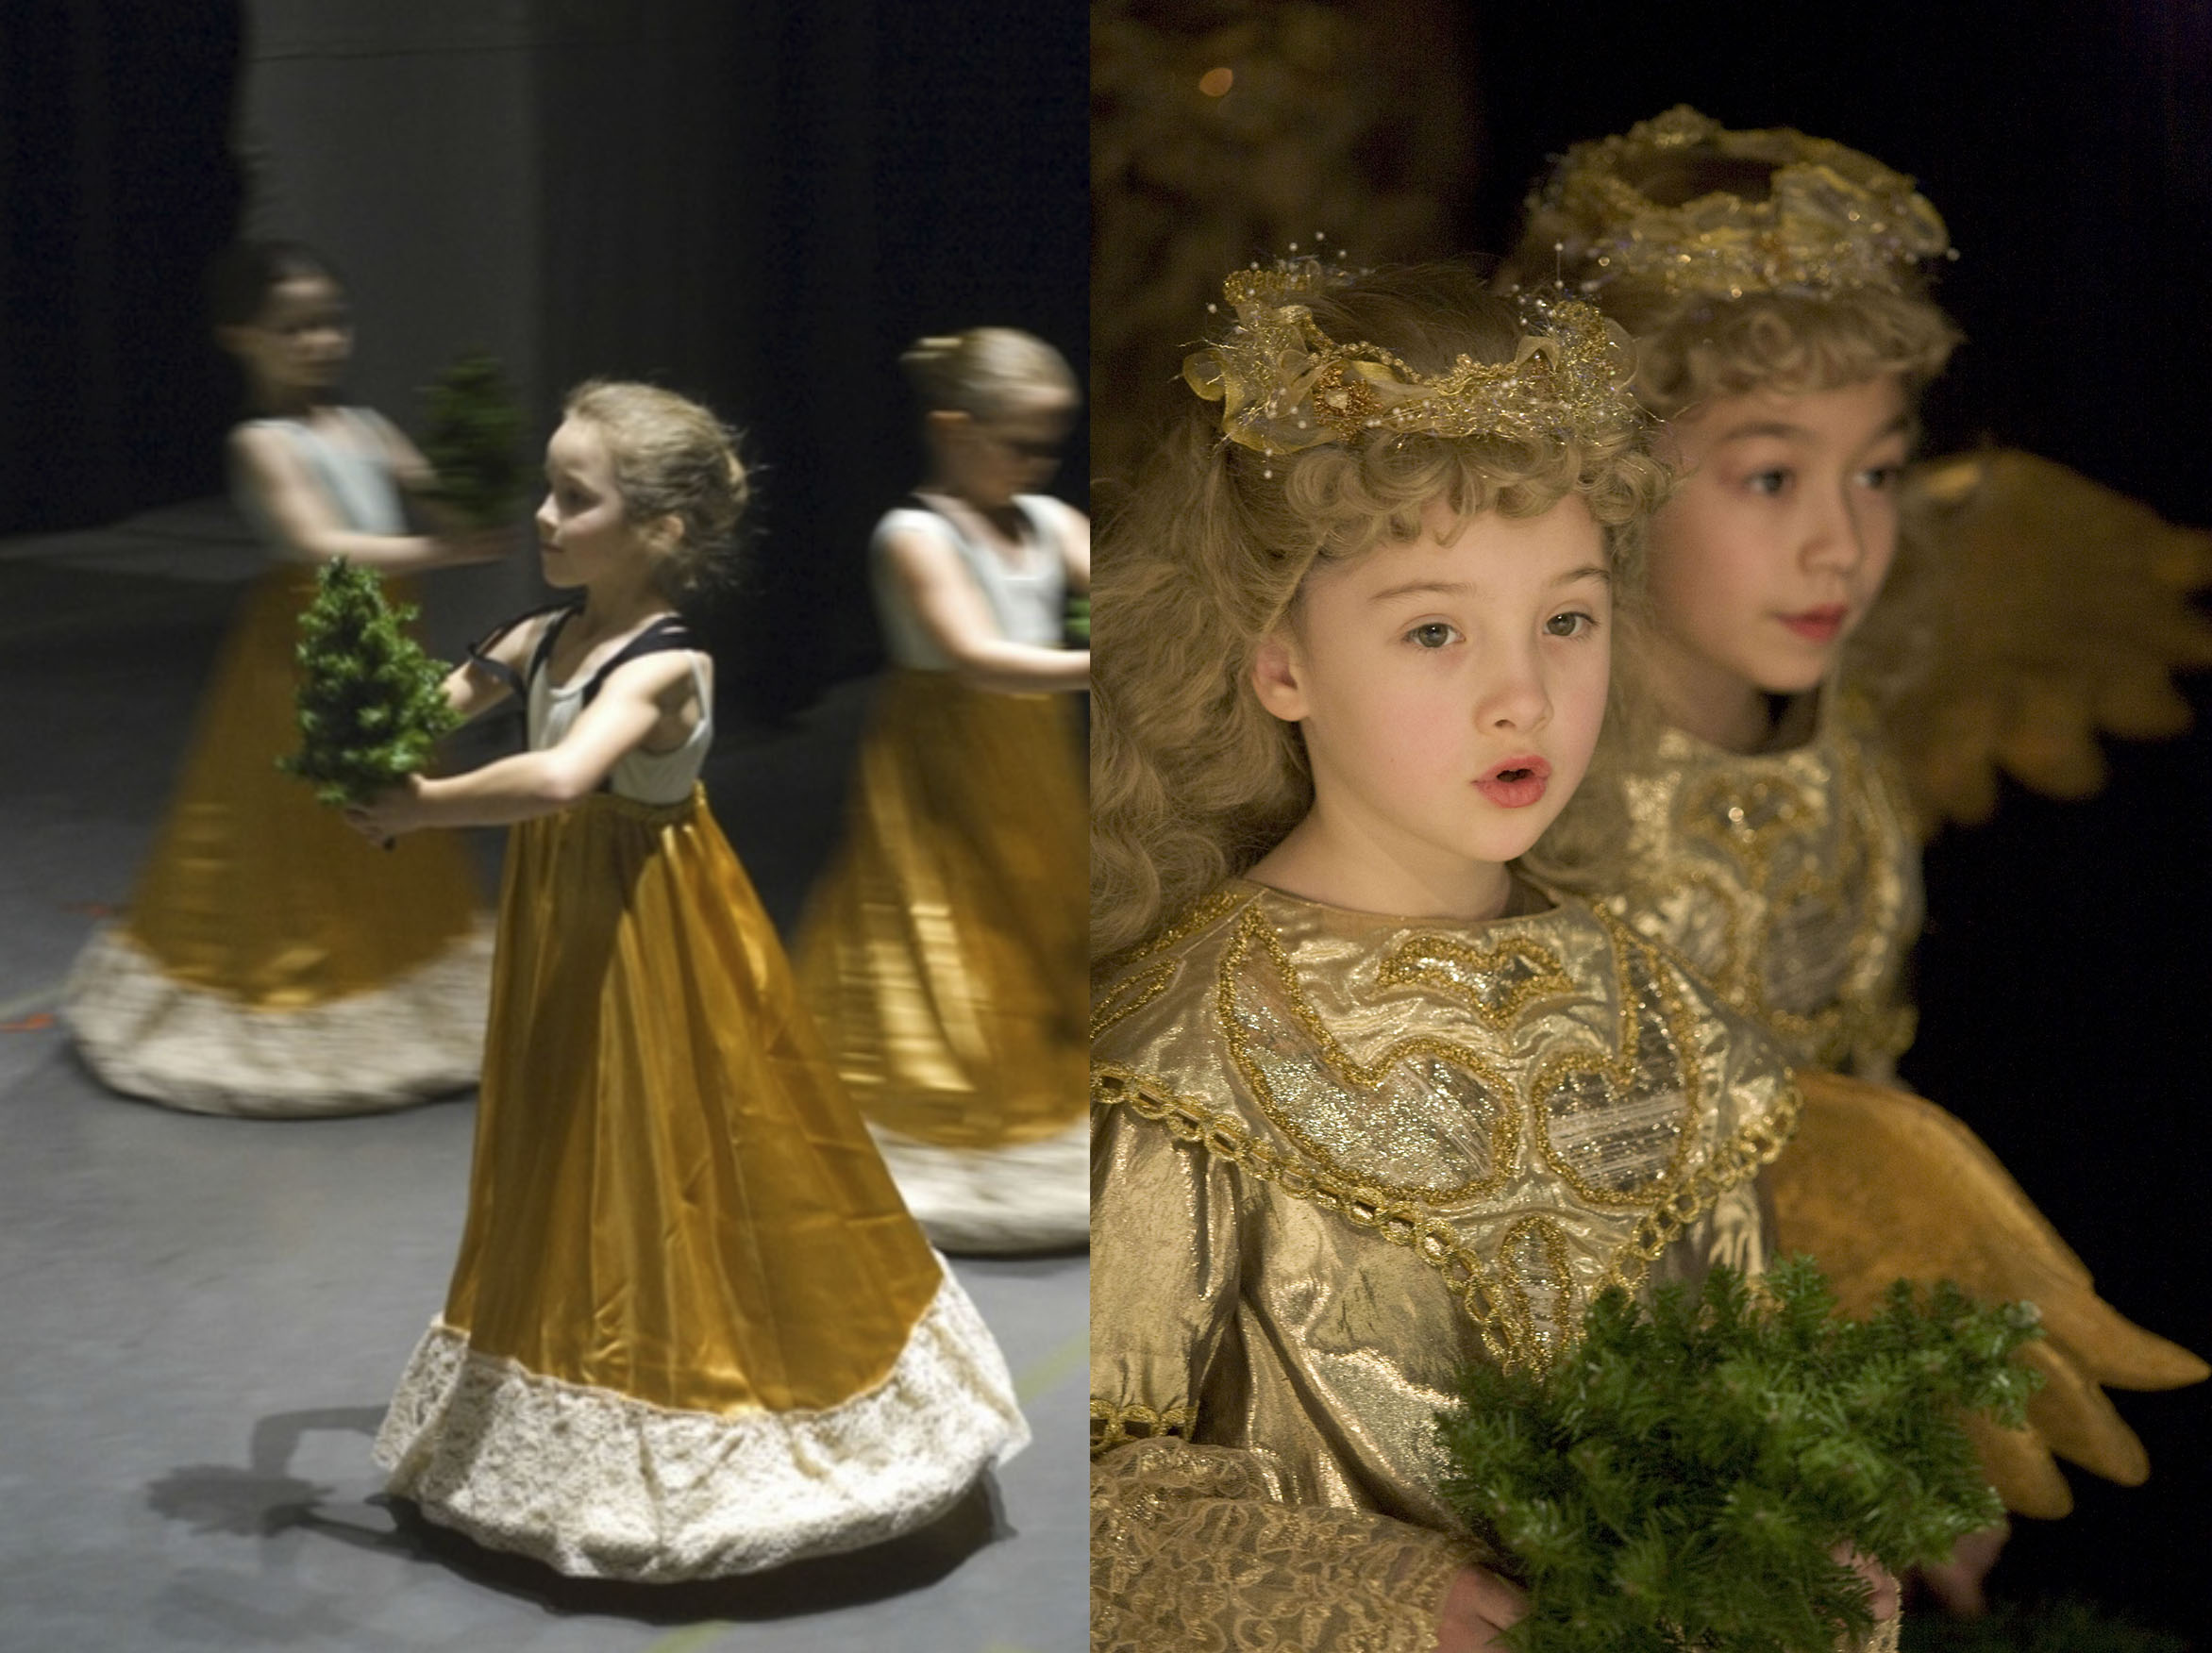 School of Oregon Ballet Theatre perform in George Balanchine's The Nutcracker. Photo on right by Blaine Truitt Covert.